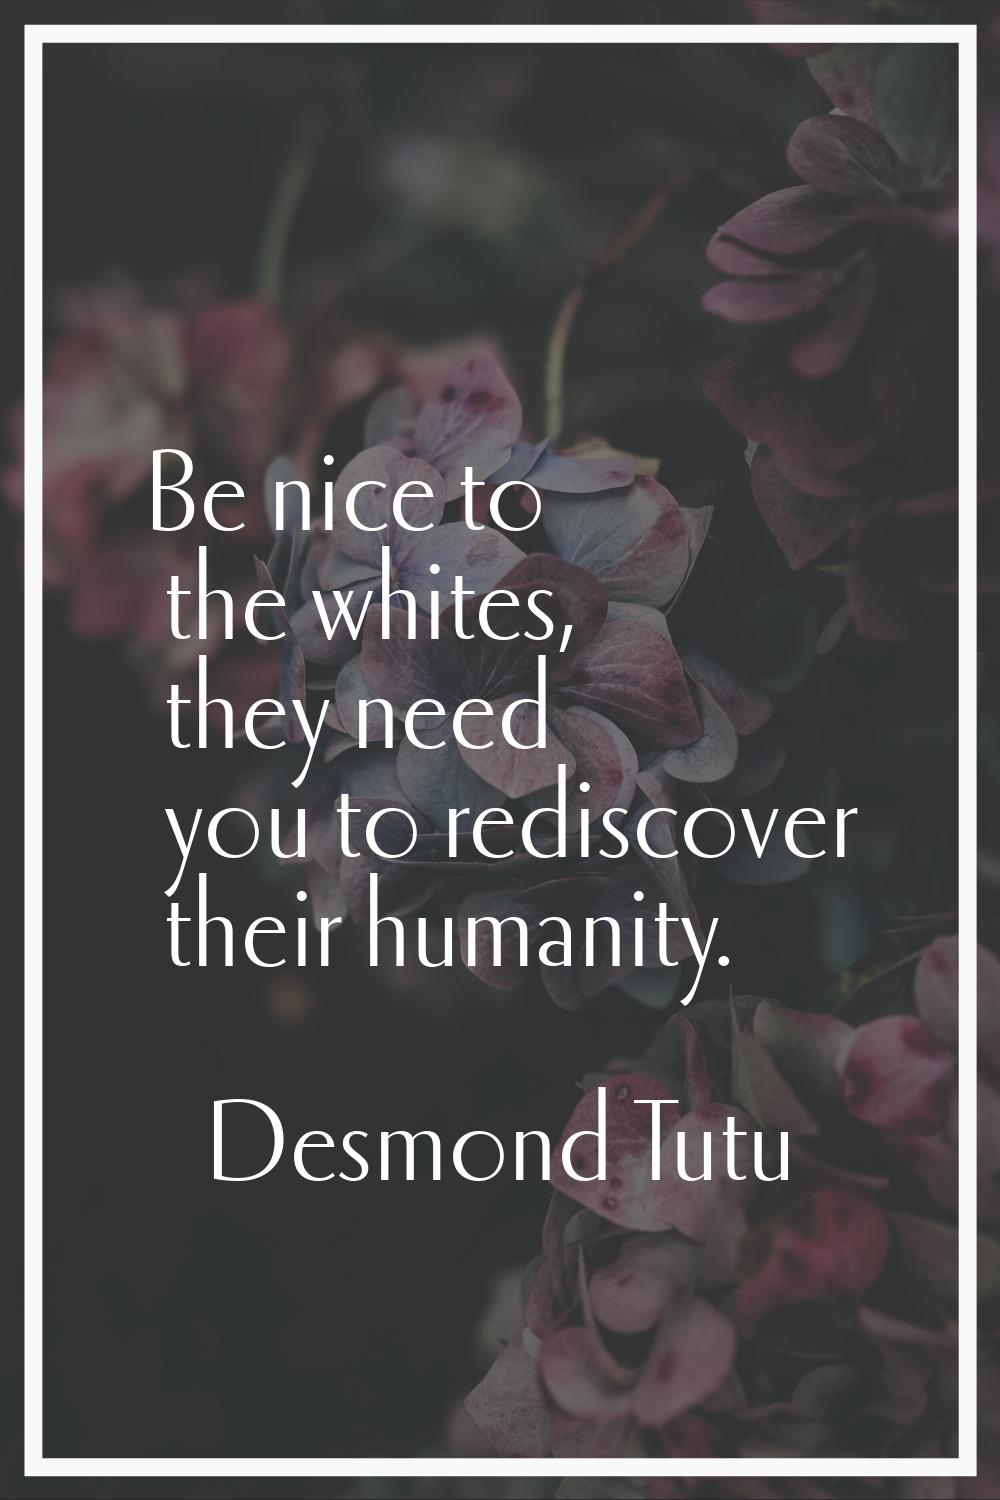 Be nice to the whites, they need you to rediscover their humanity.